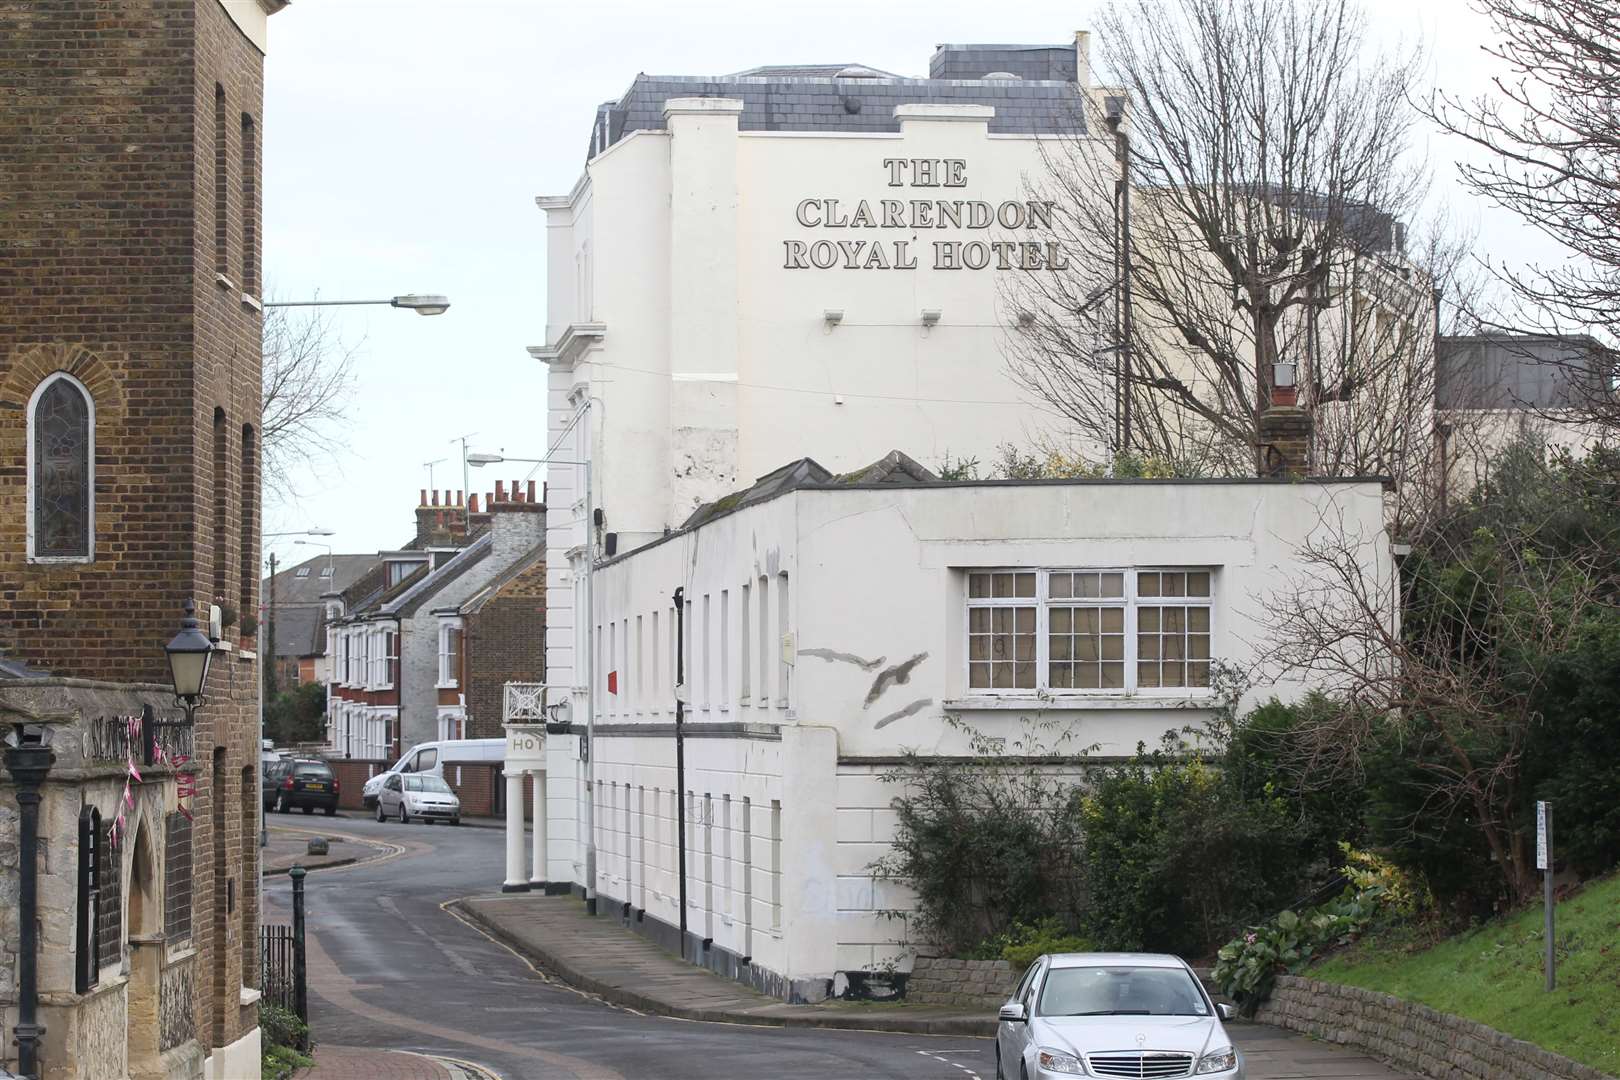 The Royal Clarendon Hotel will become a community hub. Picture: John Westhrop